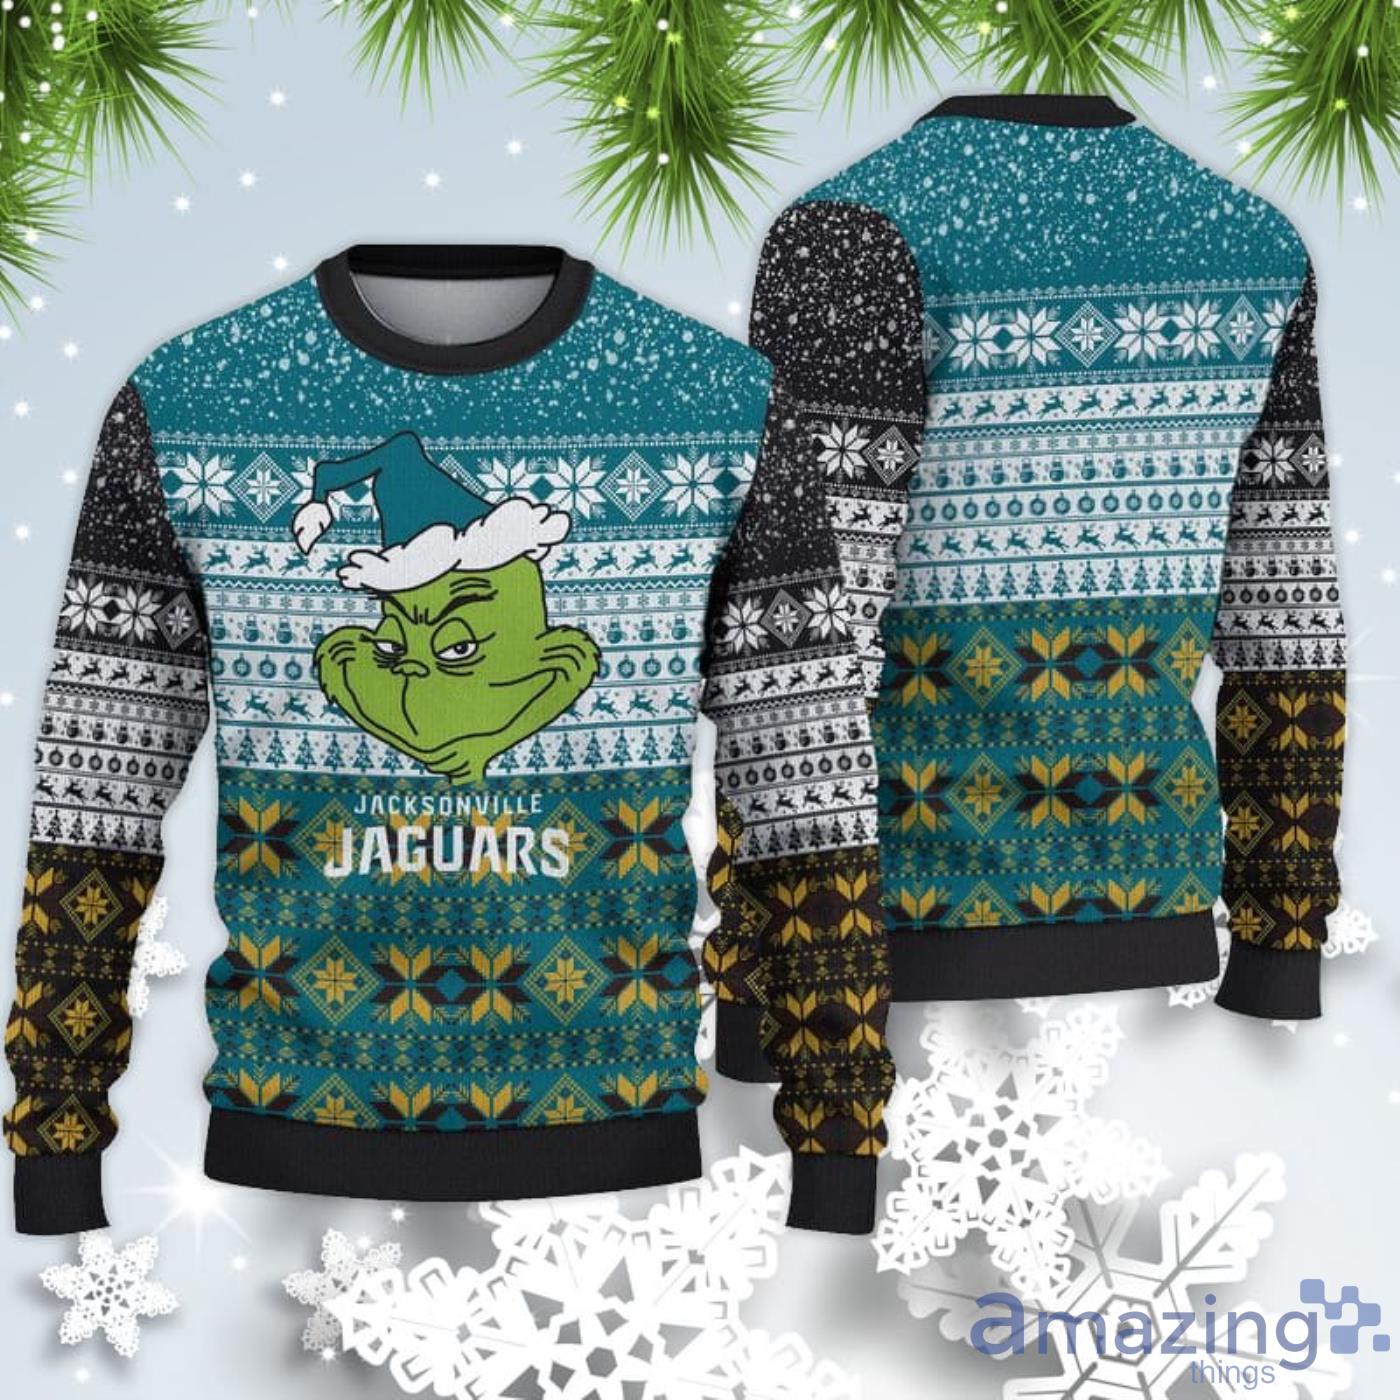 Jacksonville Jaguars Christmas Grinch Sweater For Fans Product Photo 1